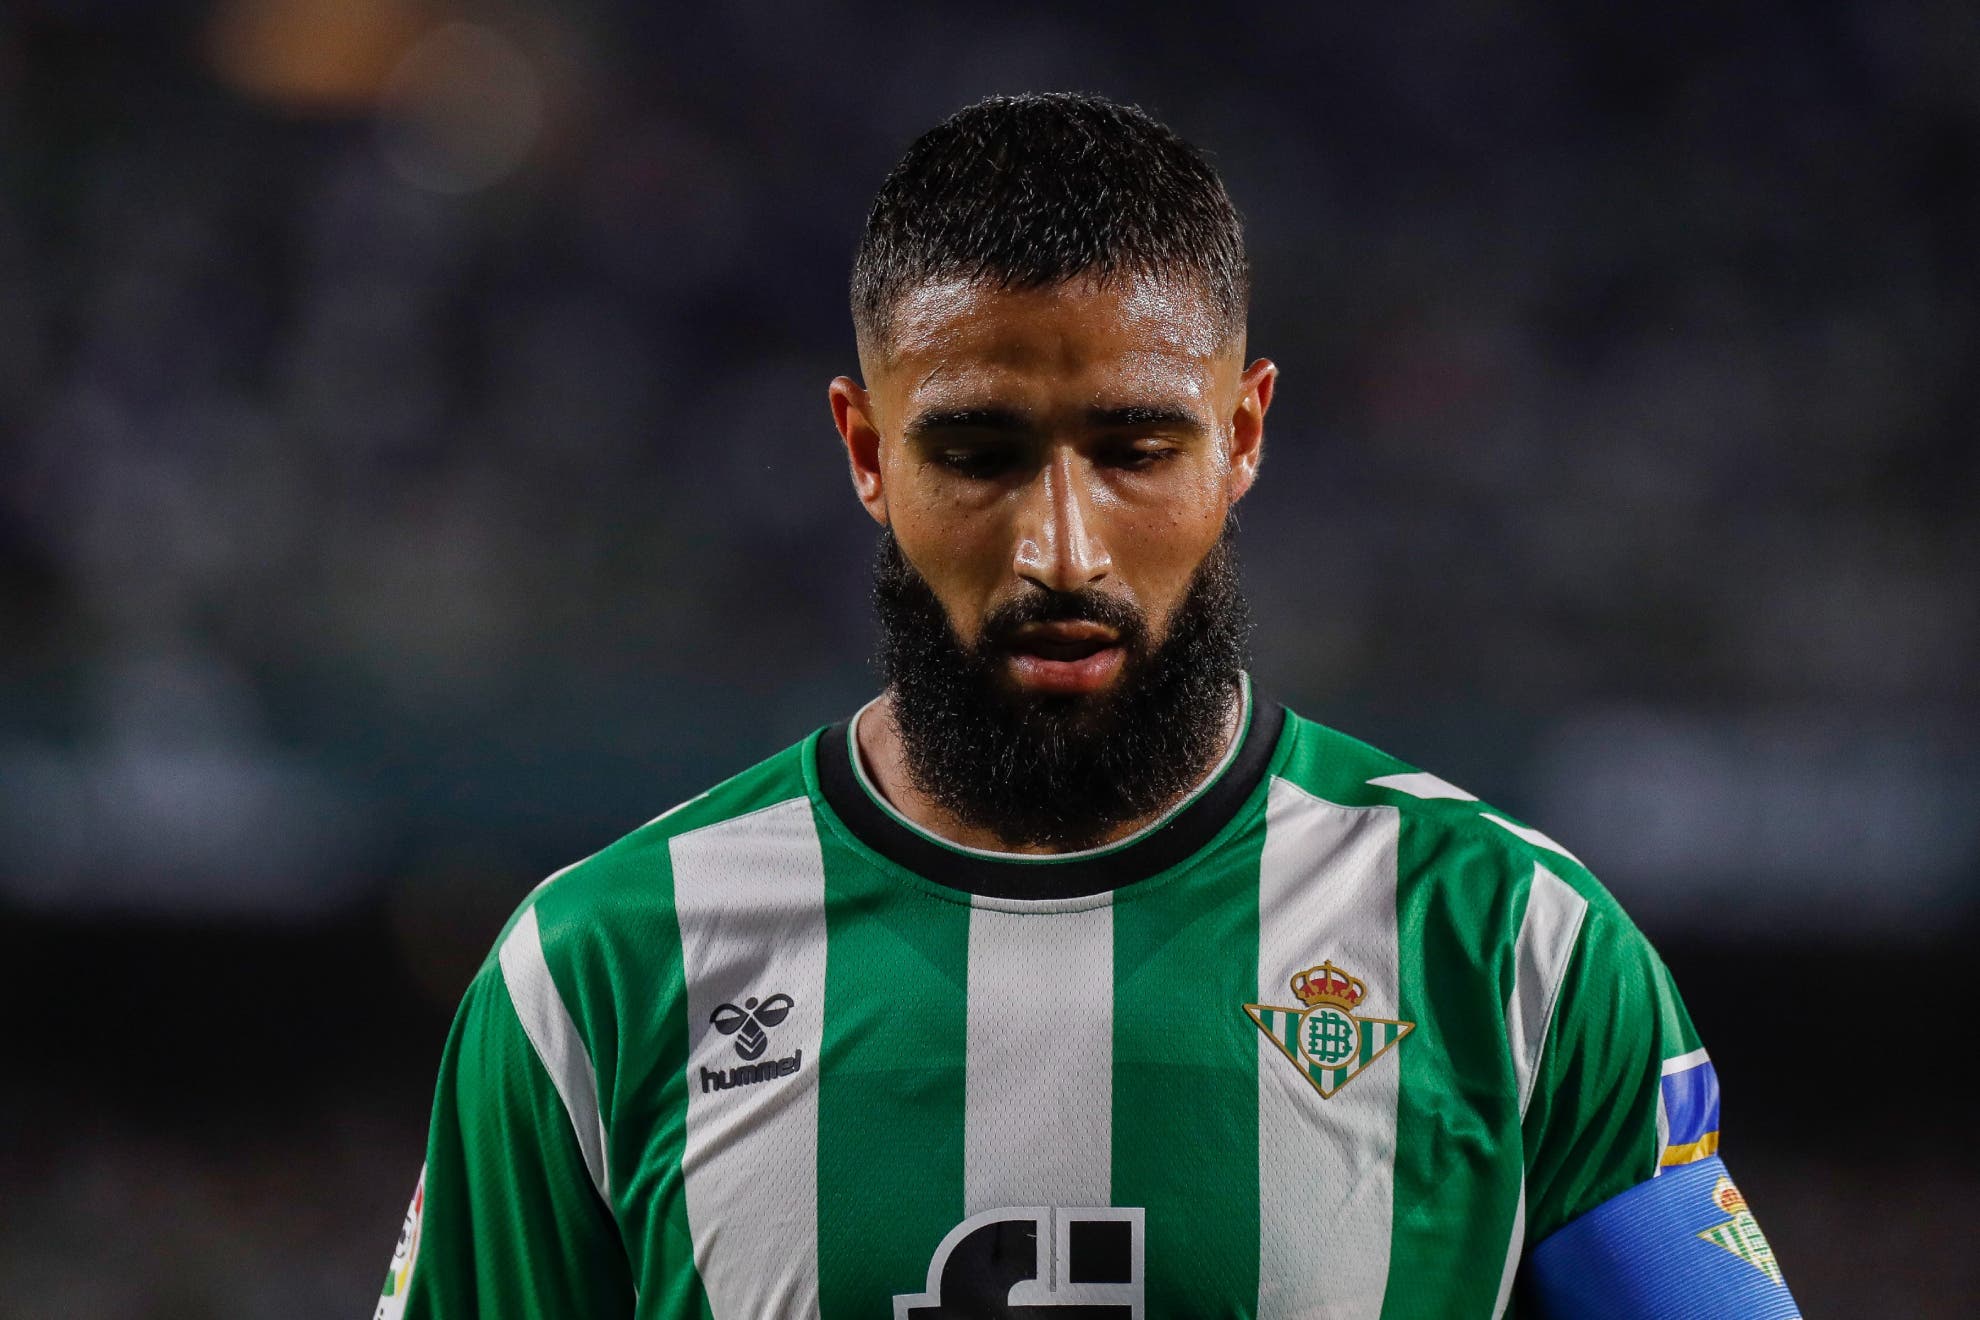 Planes has a hunch to replace Fekir at Betis: the crack of the future
	
